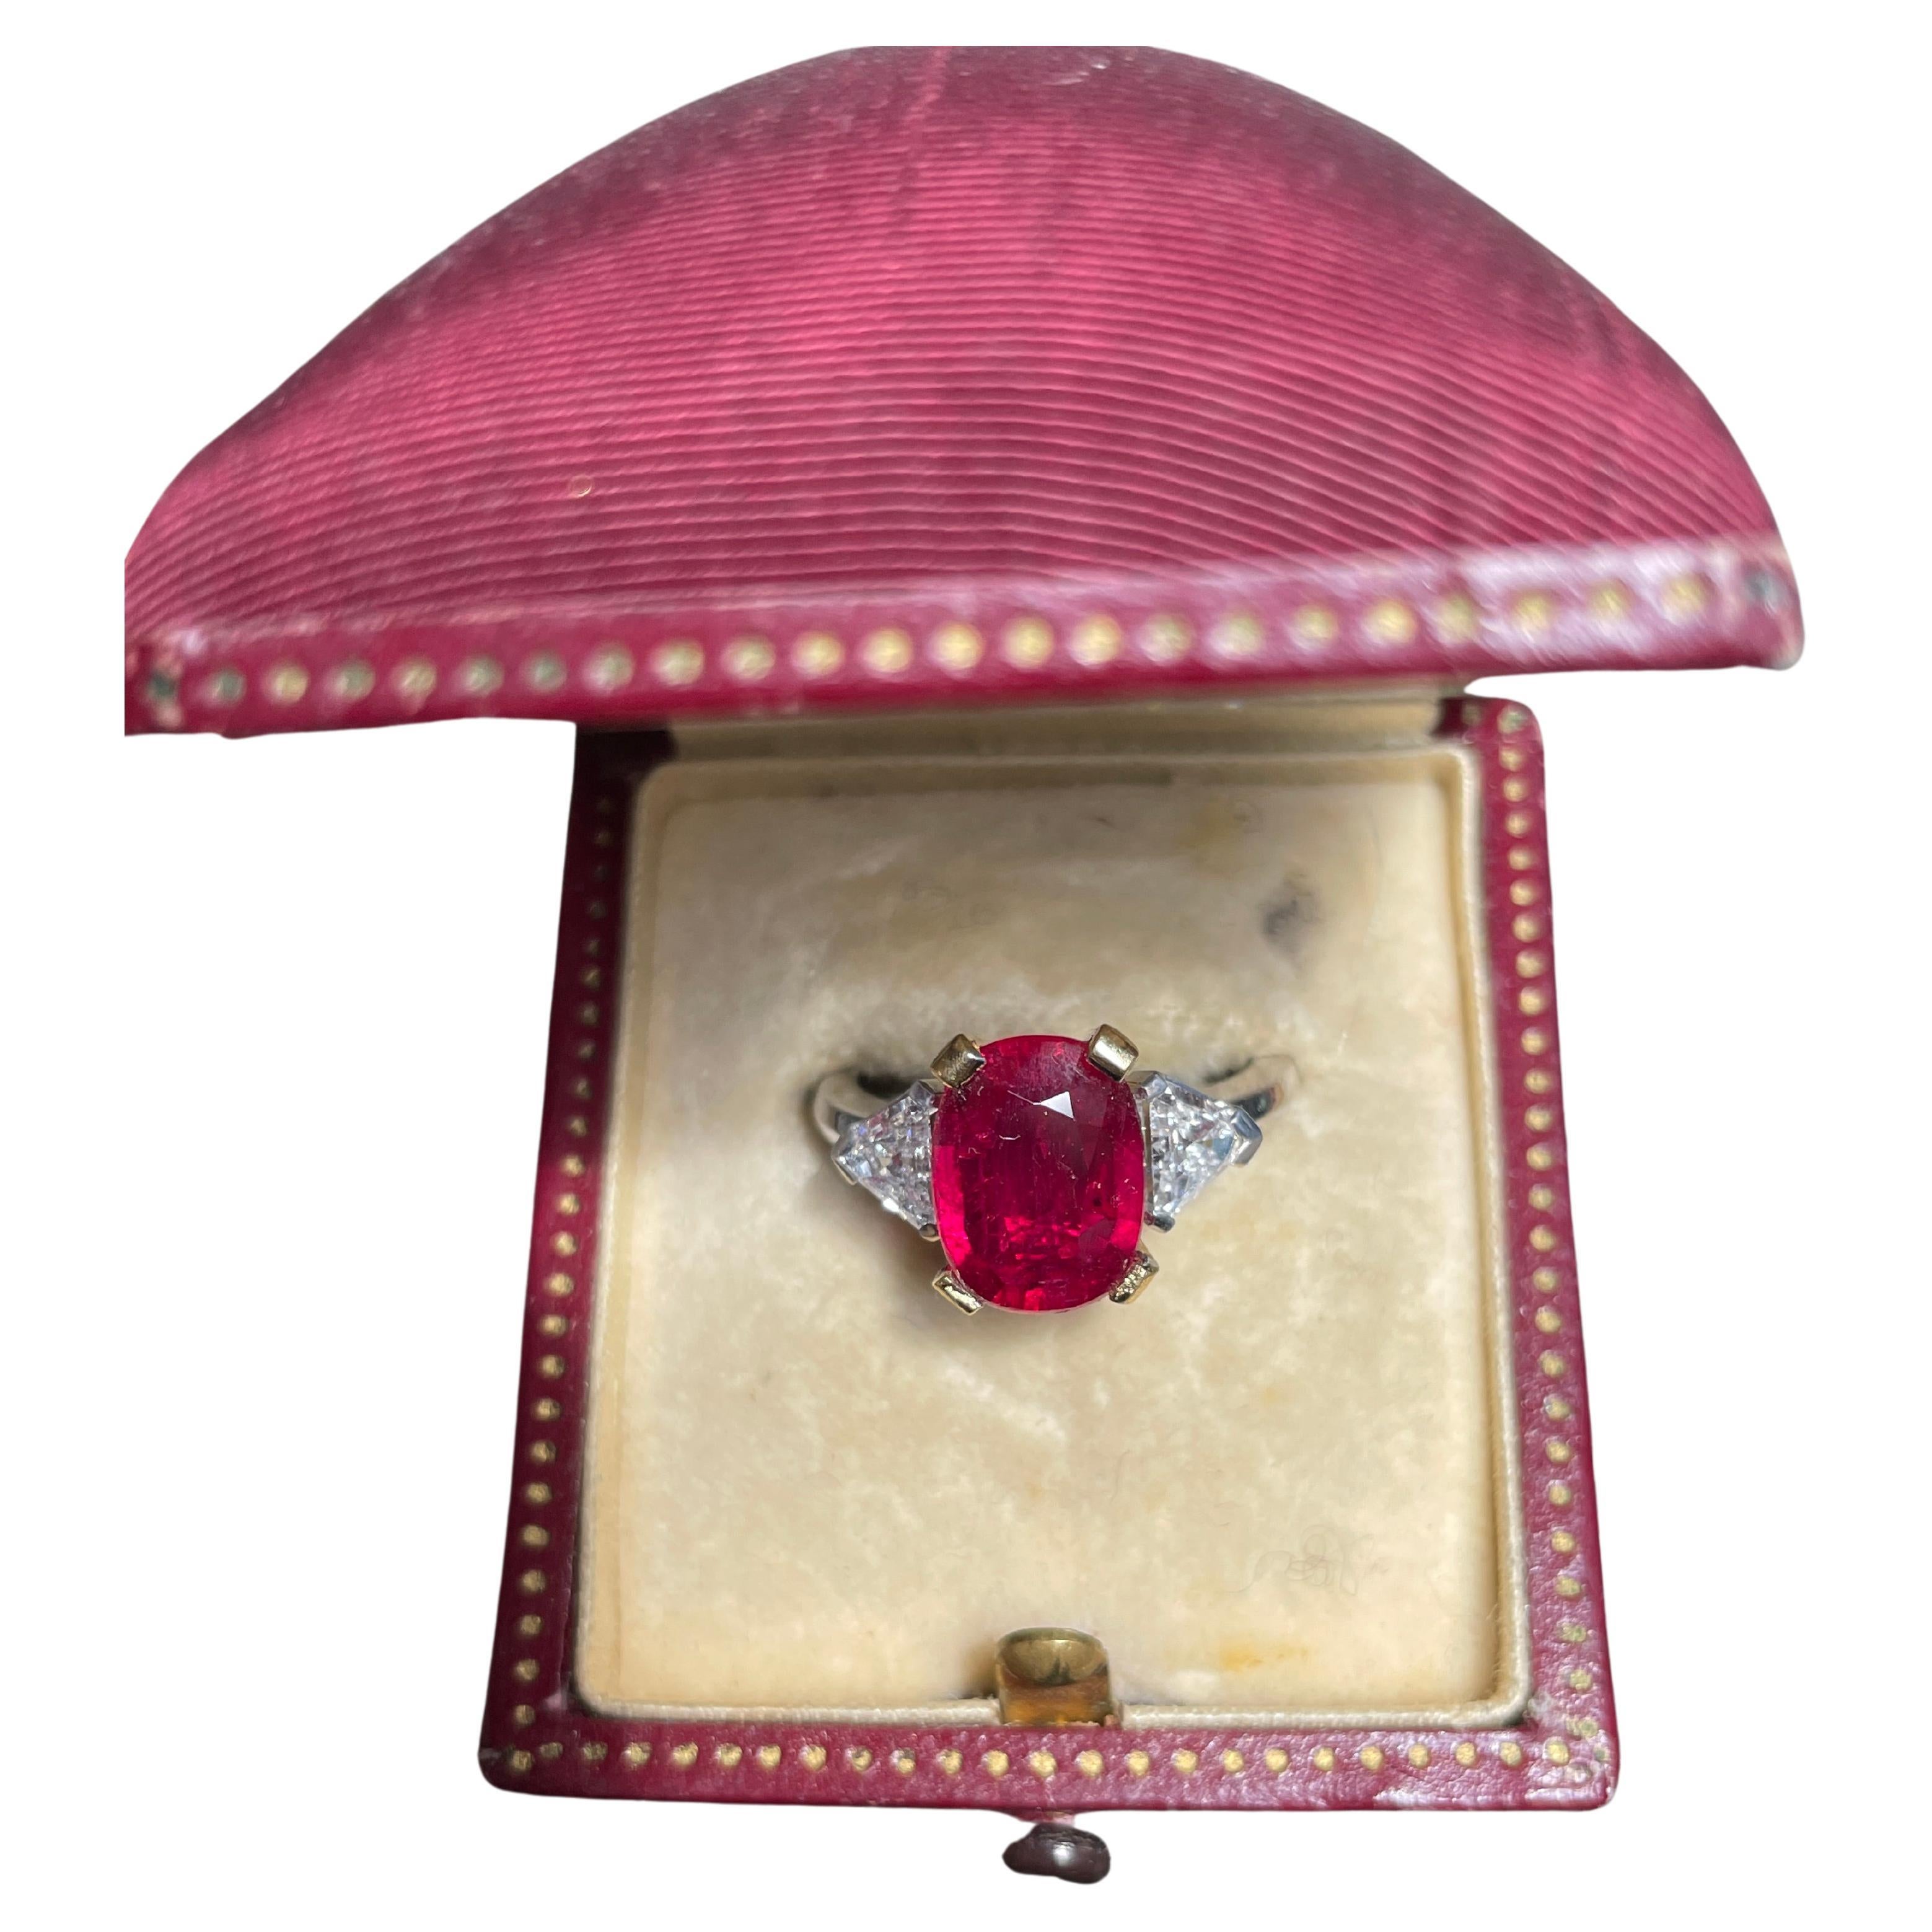 GEM quality 3,21 ct Ruby setted in a Platinum and Yellow hand crafted in Italy mounting, surrounded by 2 white diamond triangles 
The stone is VIVID RED Pigeon Blood Type, very clean and brilliant, nice spready stone figures 4+ cts
This is a Top